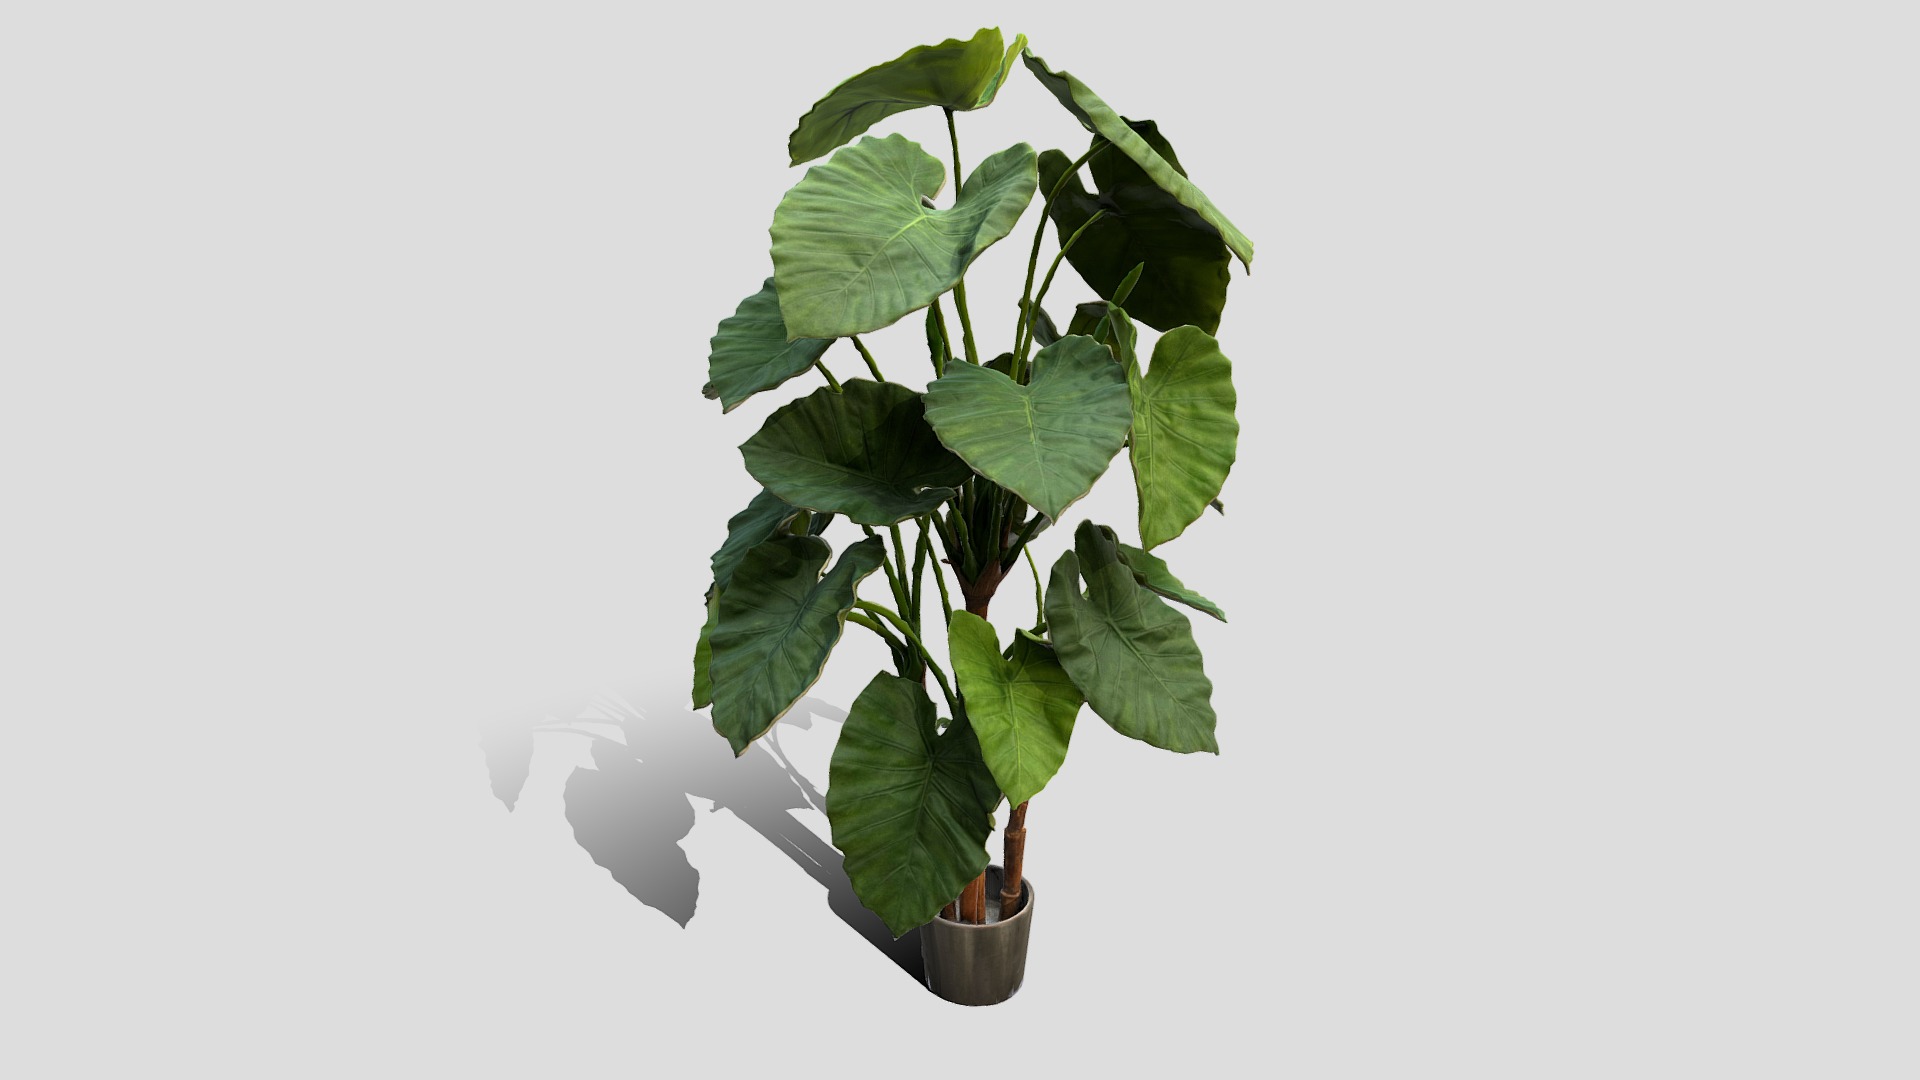 3D model 000121_152012 - This is a 3D model of the 000121_152012. The 3D model is about a plant in a pot.